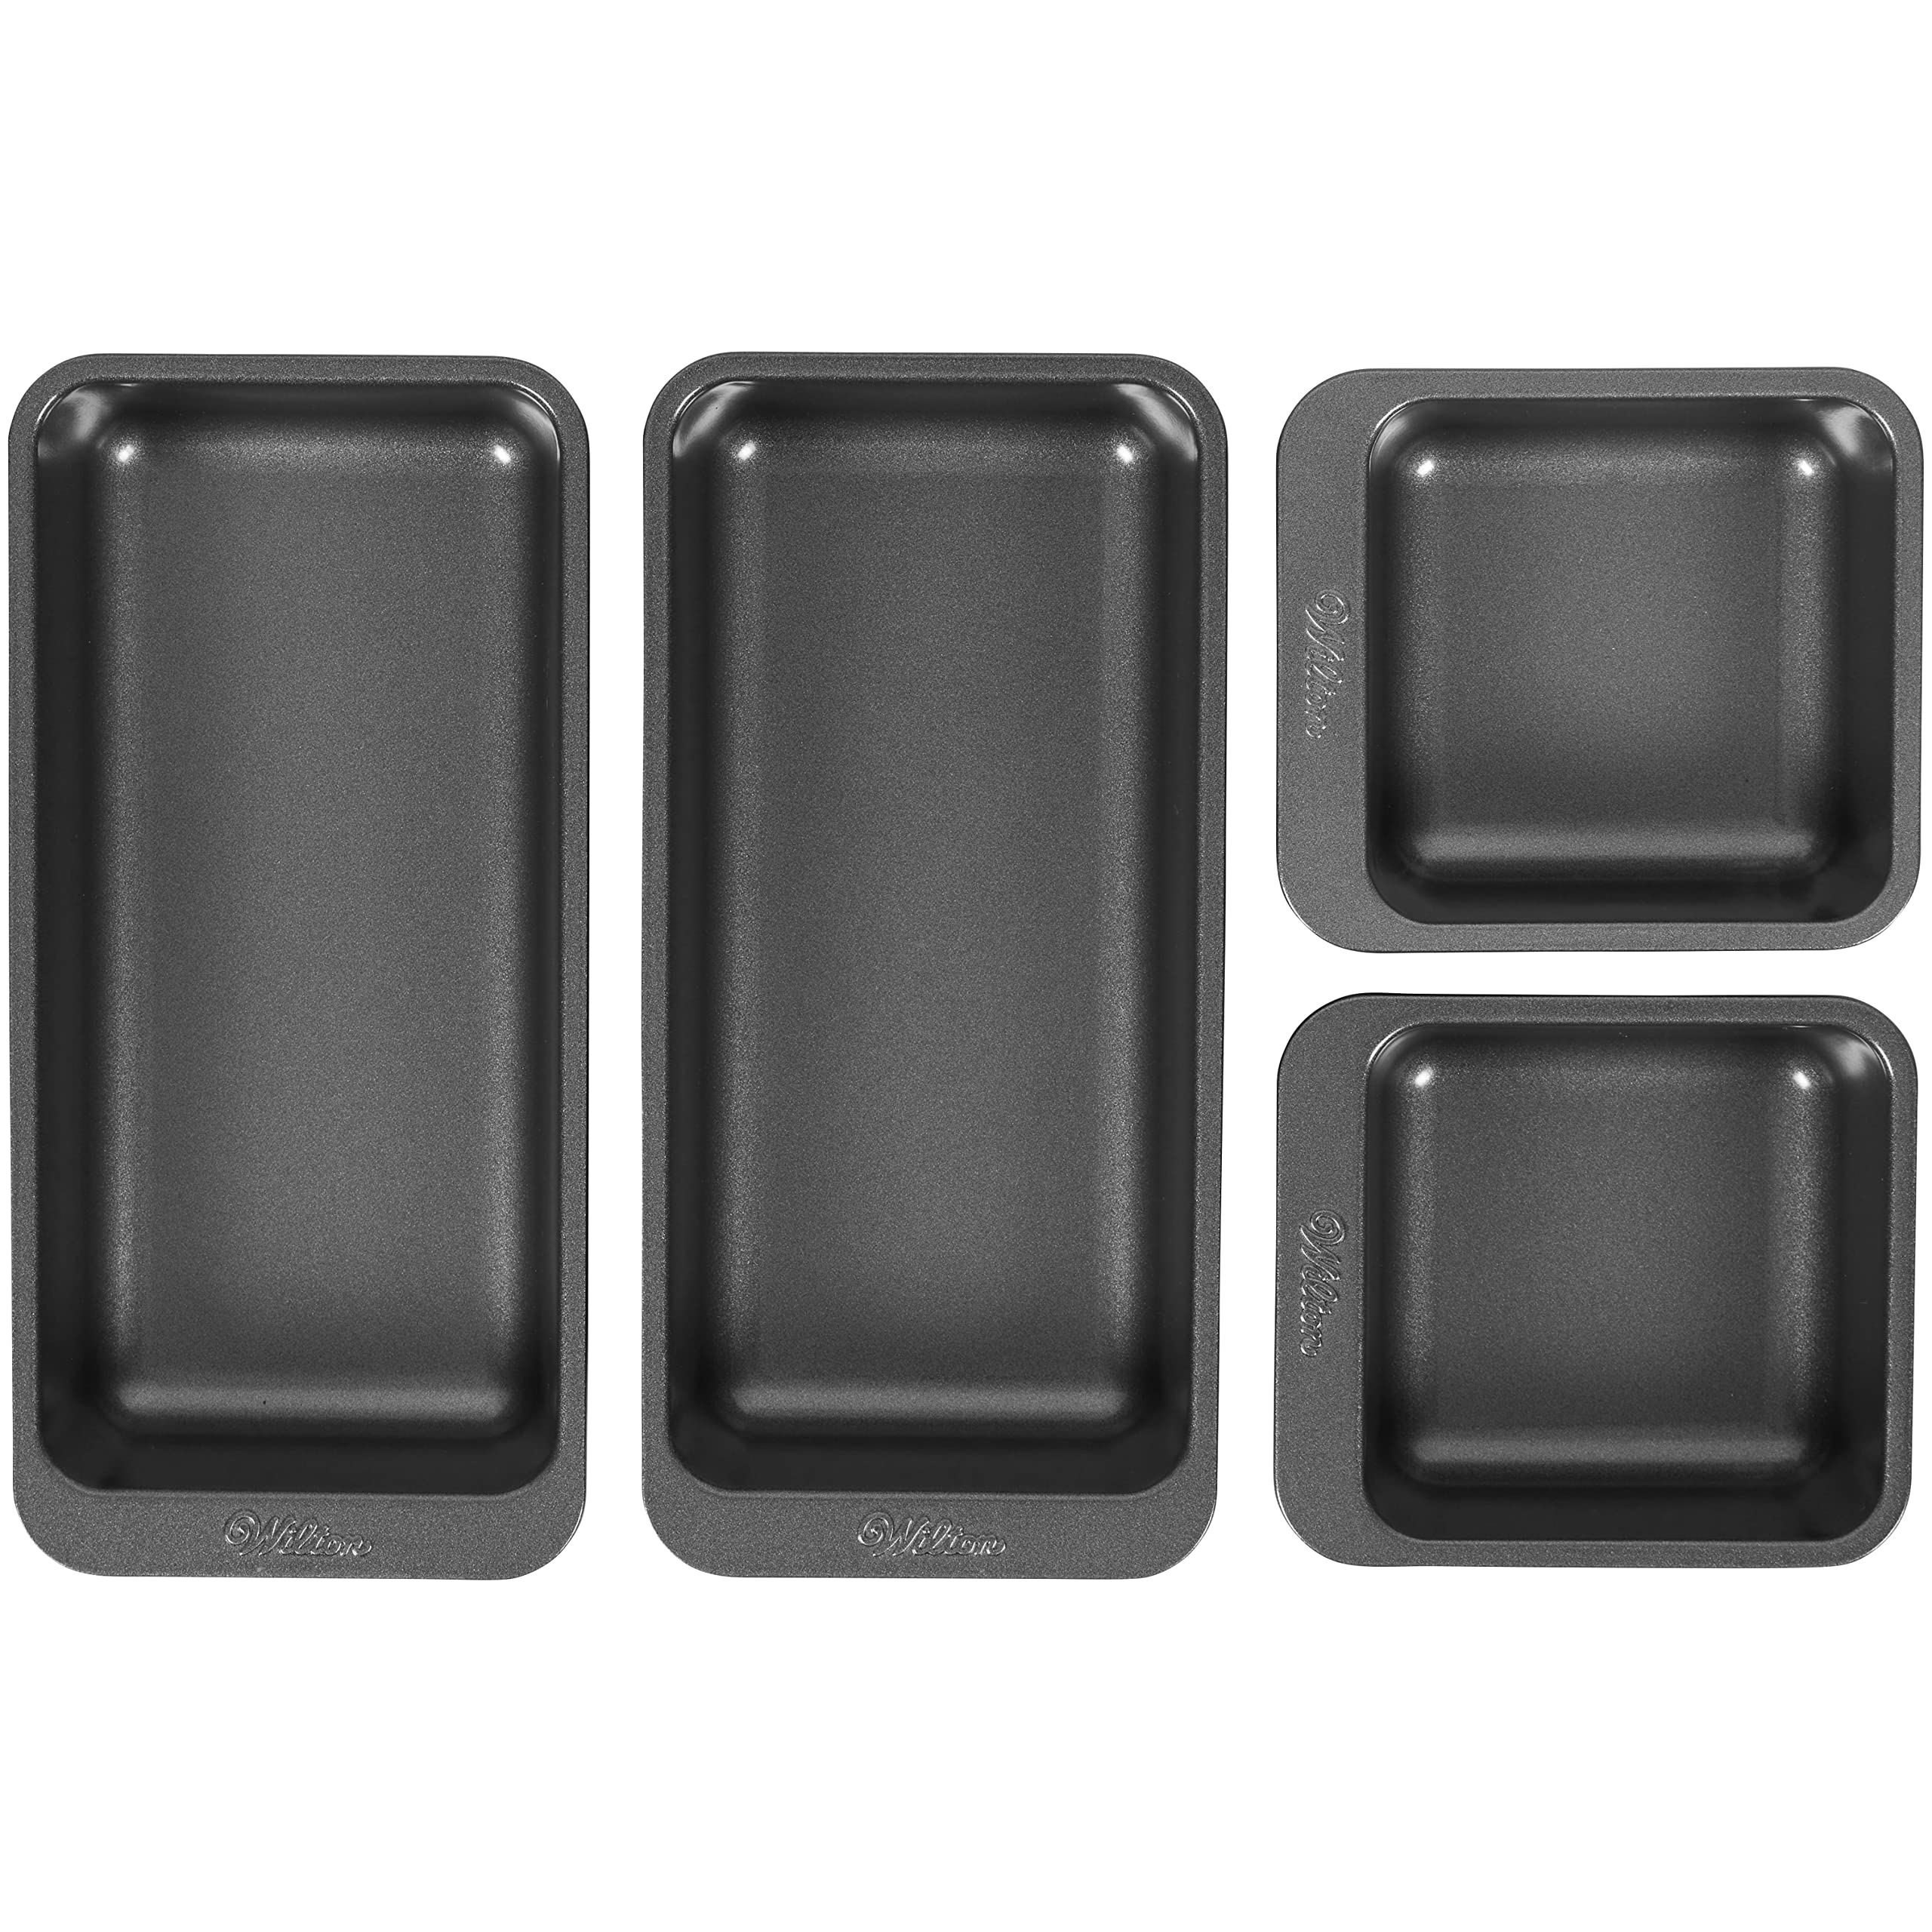 Wilton Perfect Results Square and Oblong Premium Non-Stick Baking Pan Set, 4-Piece, Steel